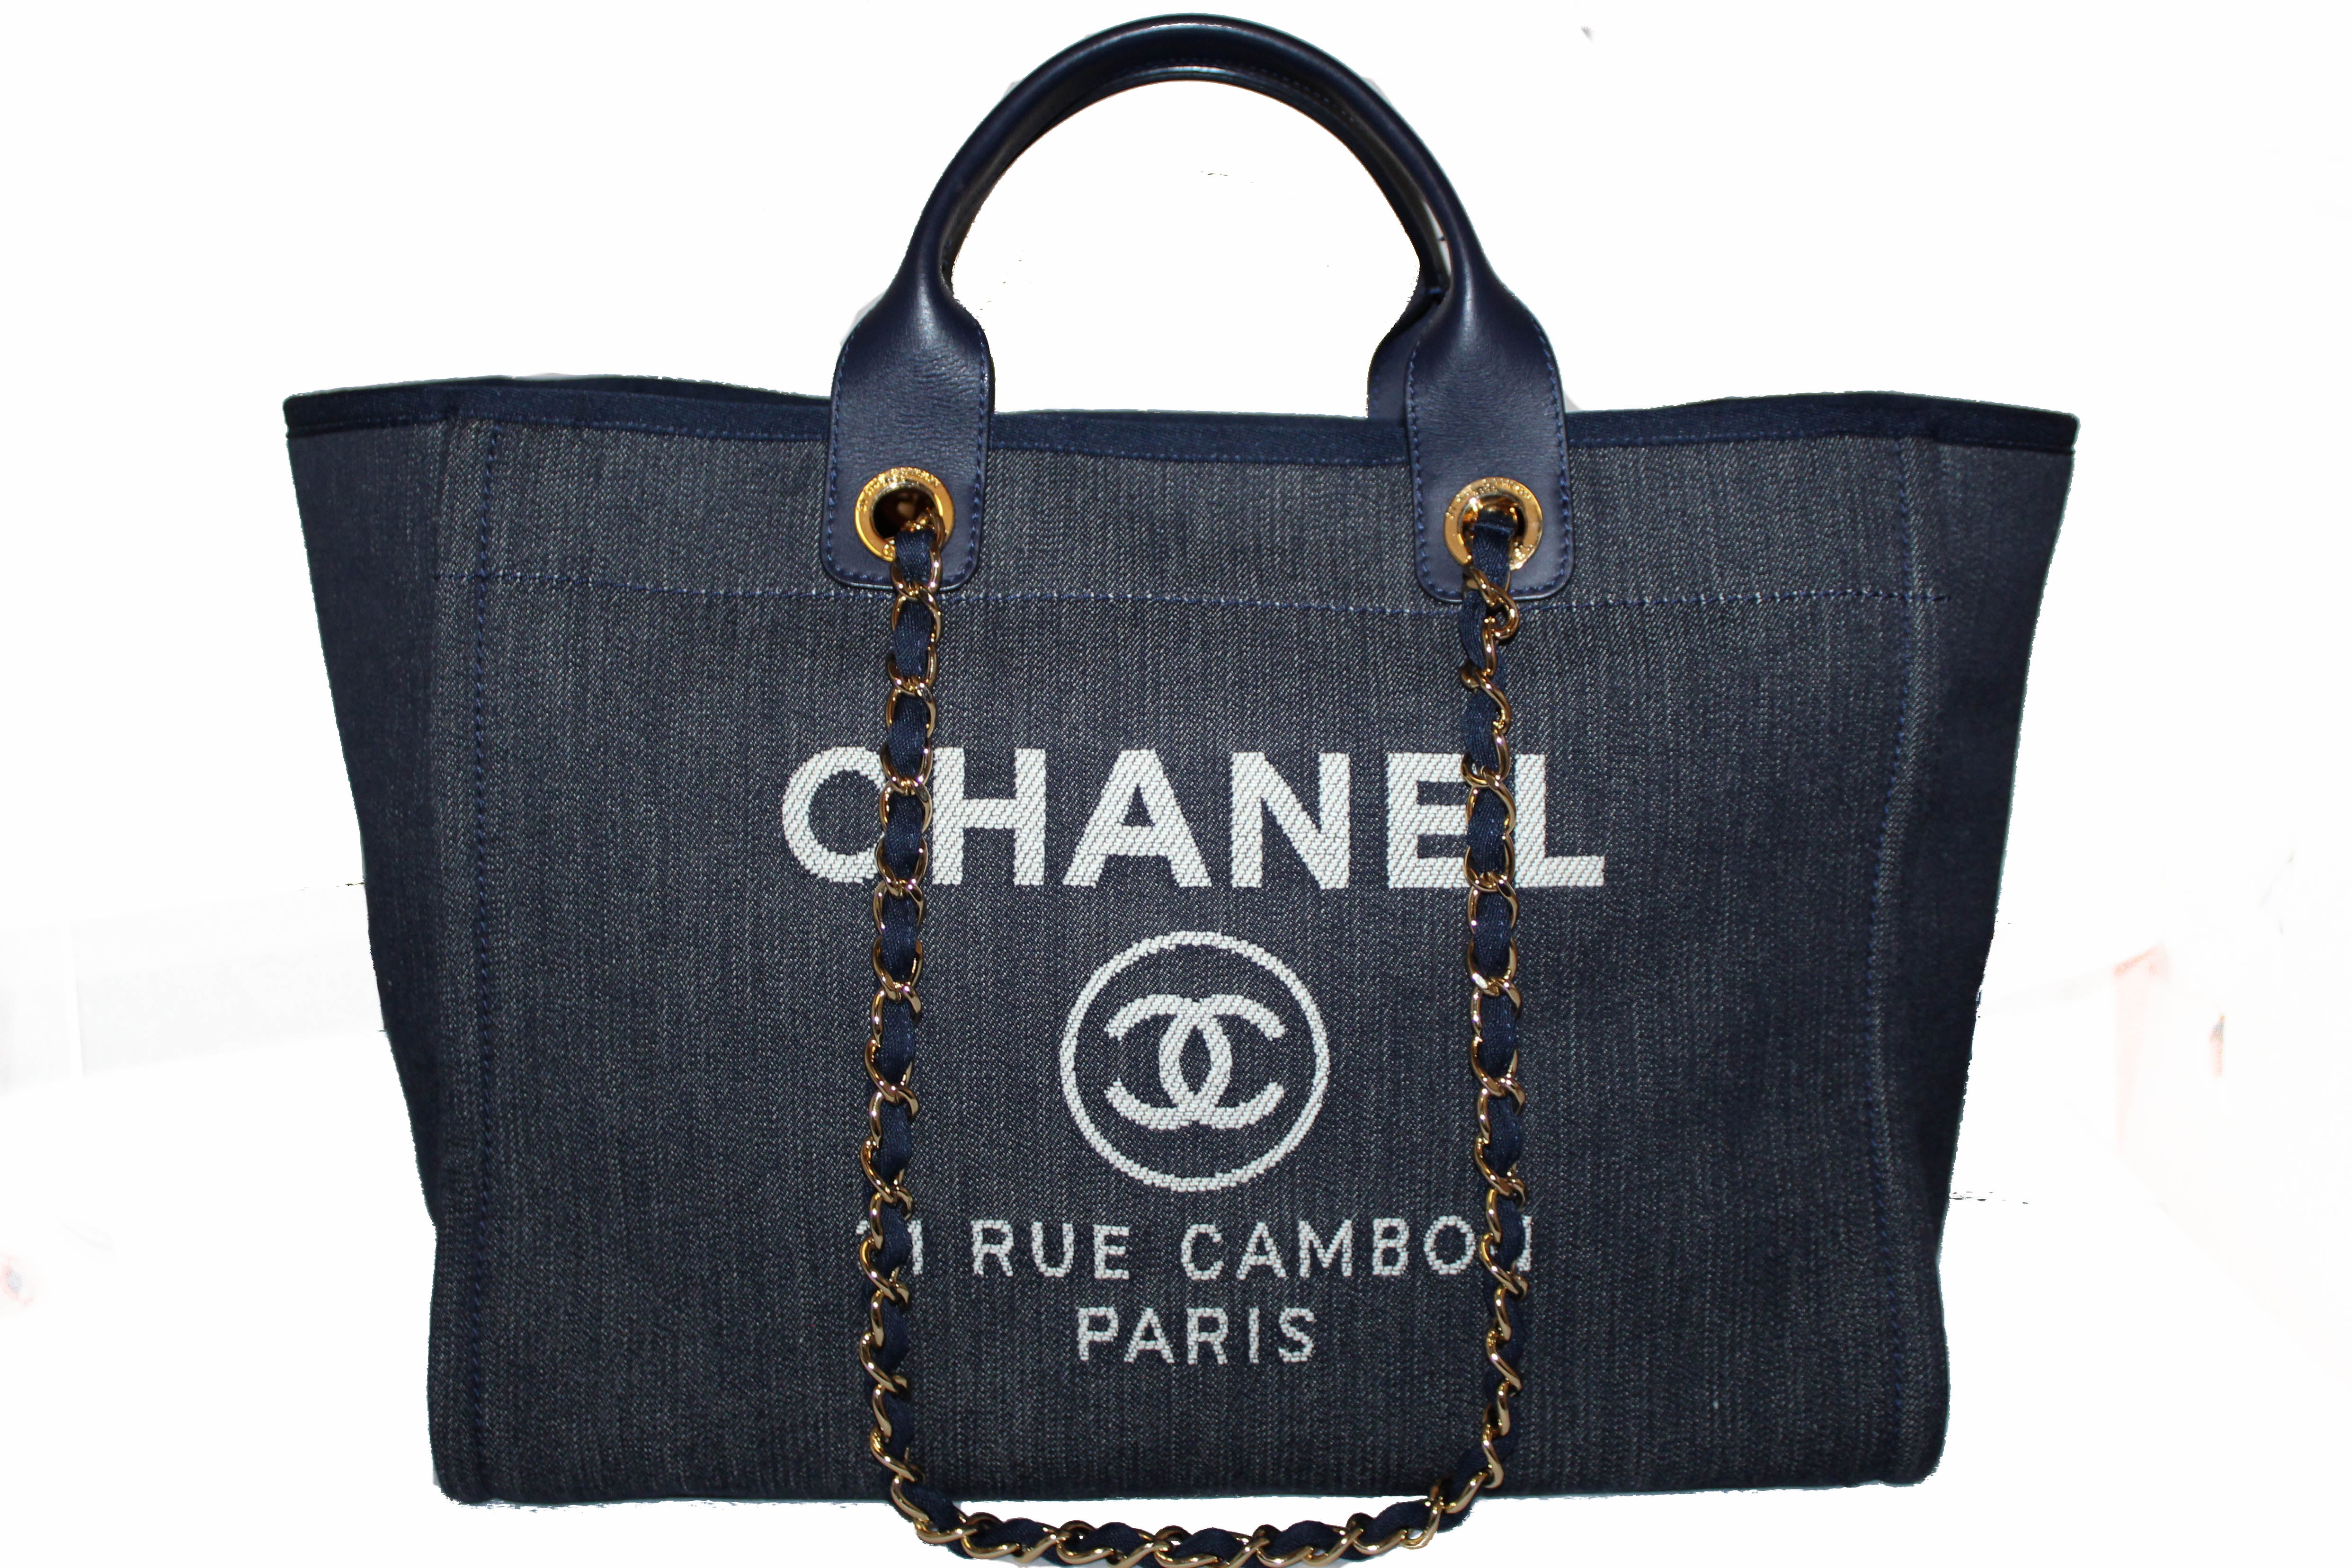 Chanel Large Deauville Tote - Blue Totes, Handbags - CHA894500